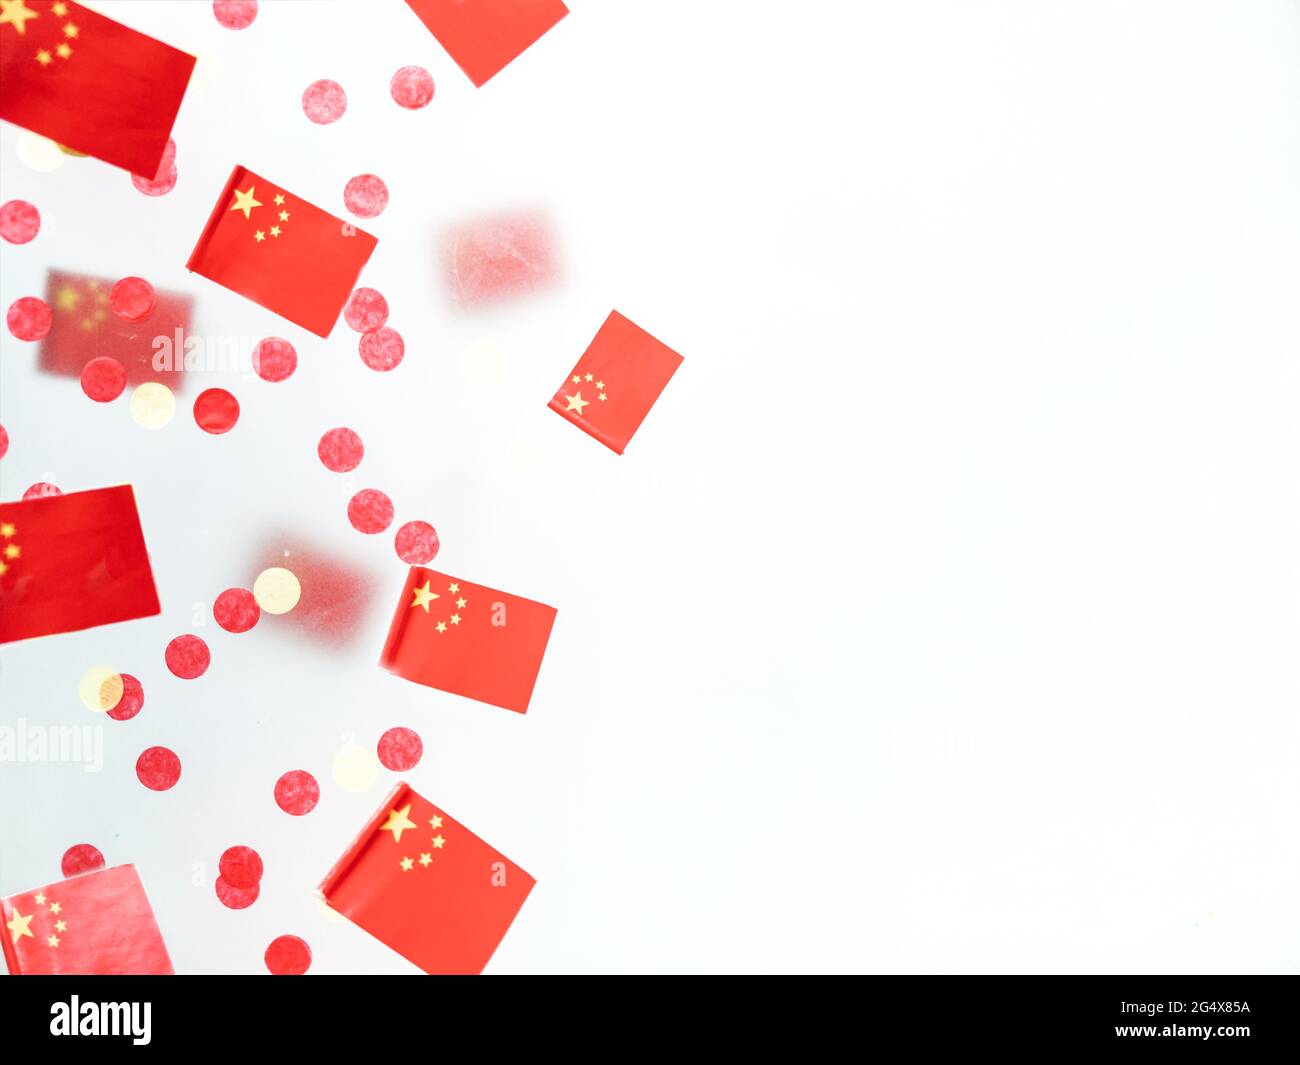 China independence day Stock Photo